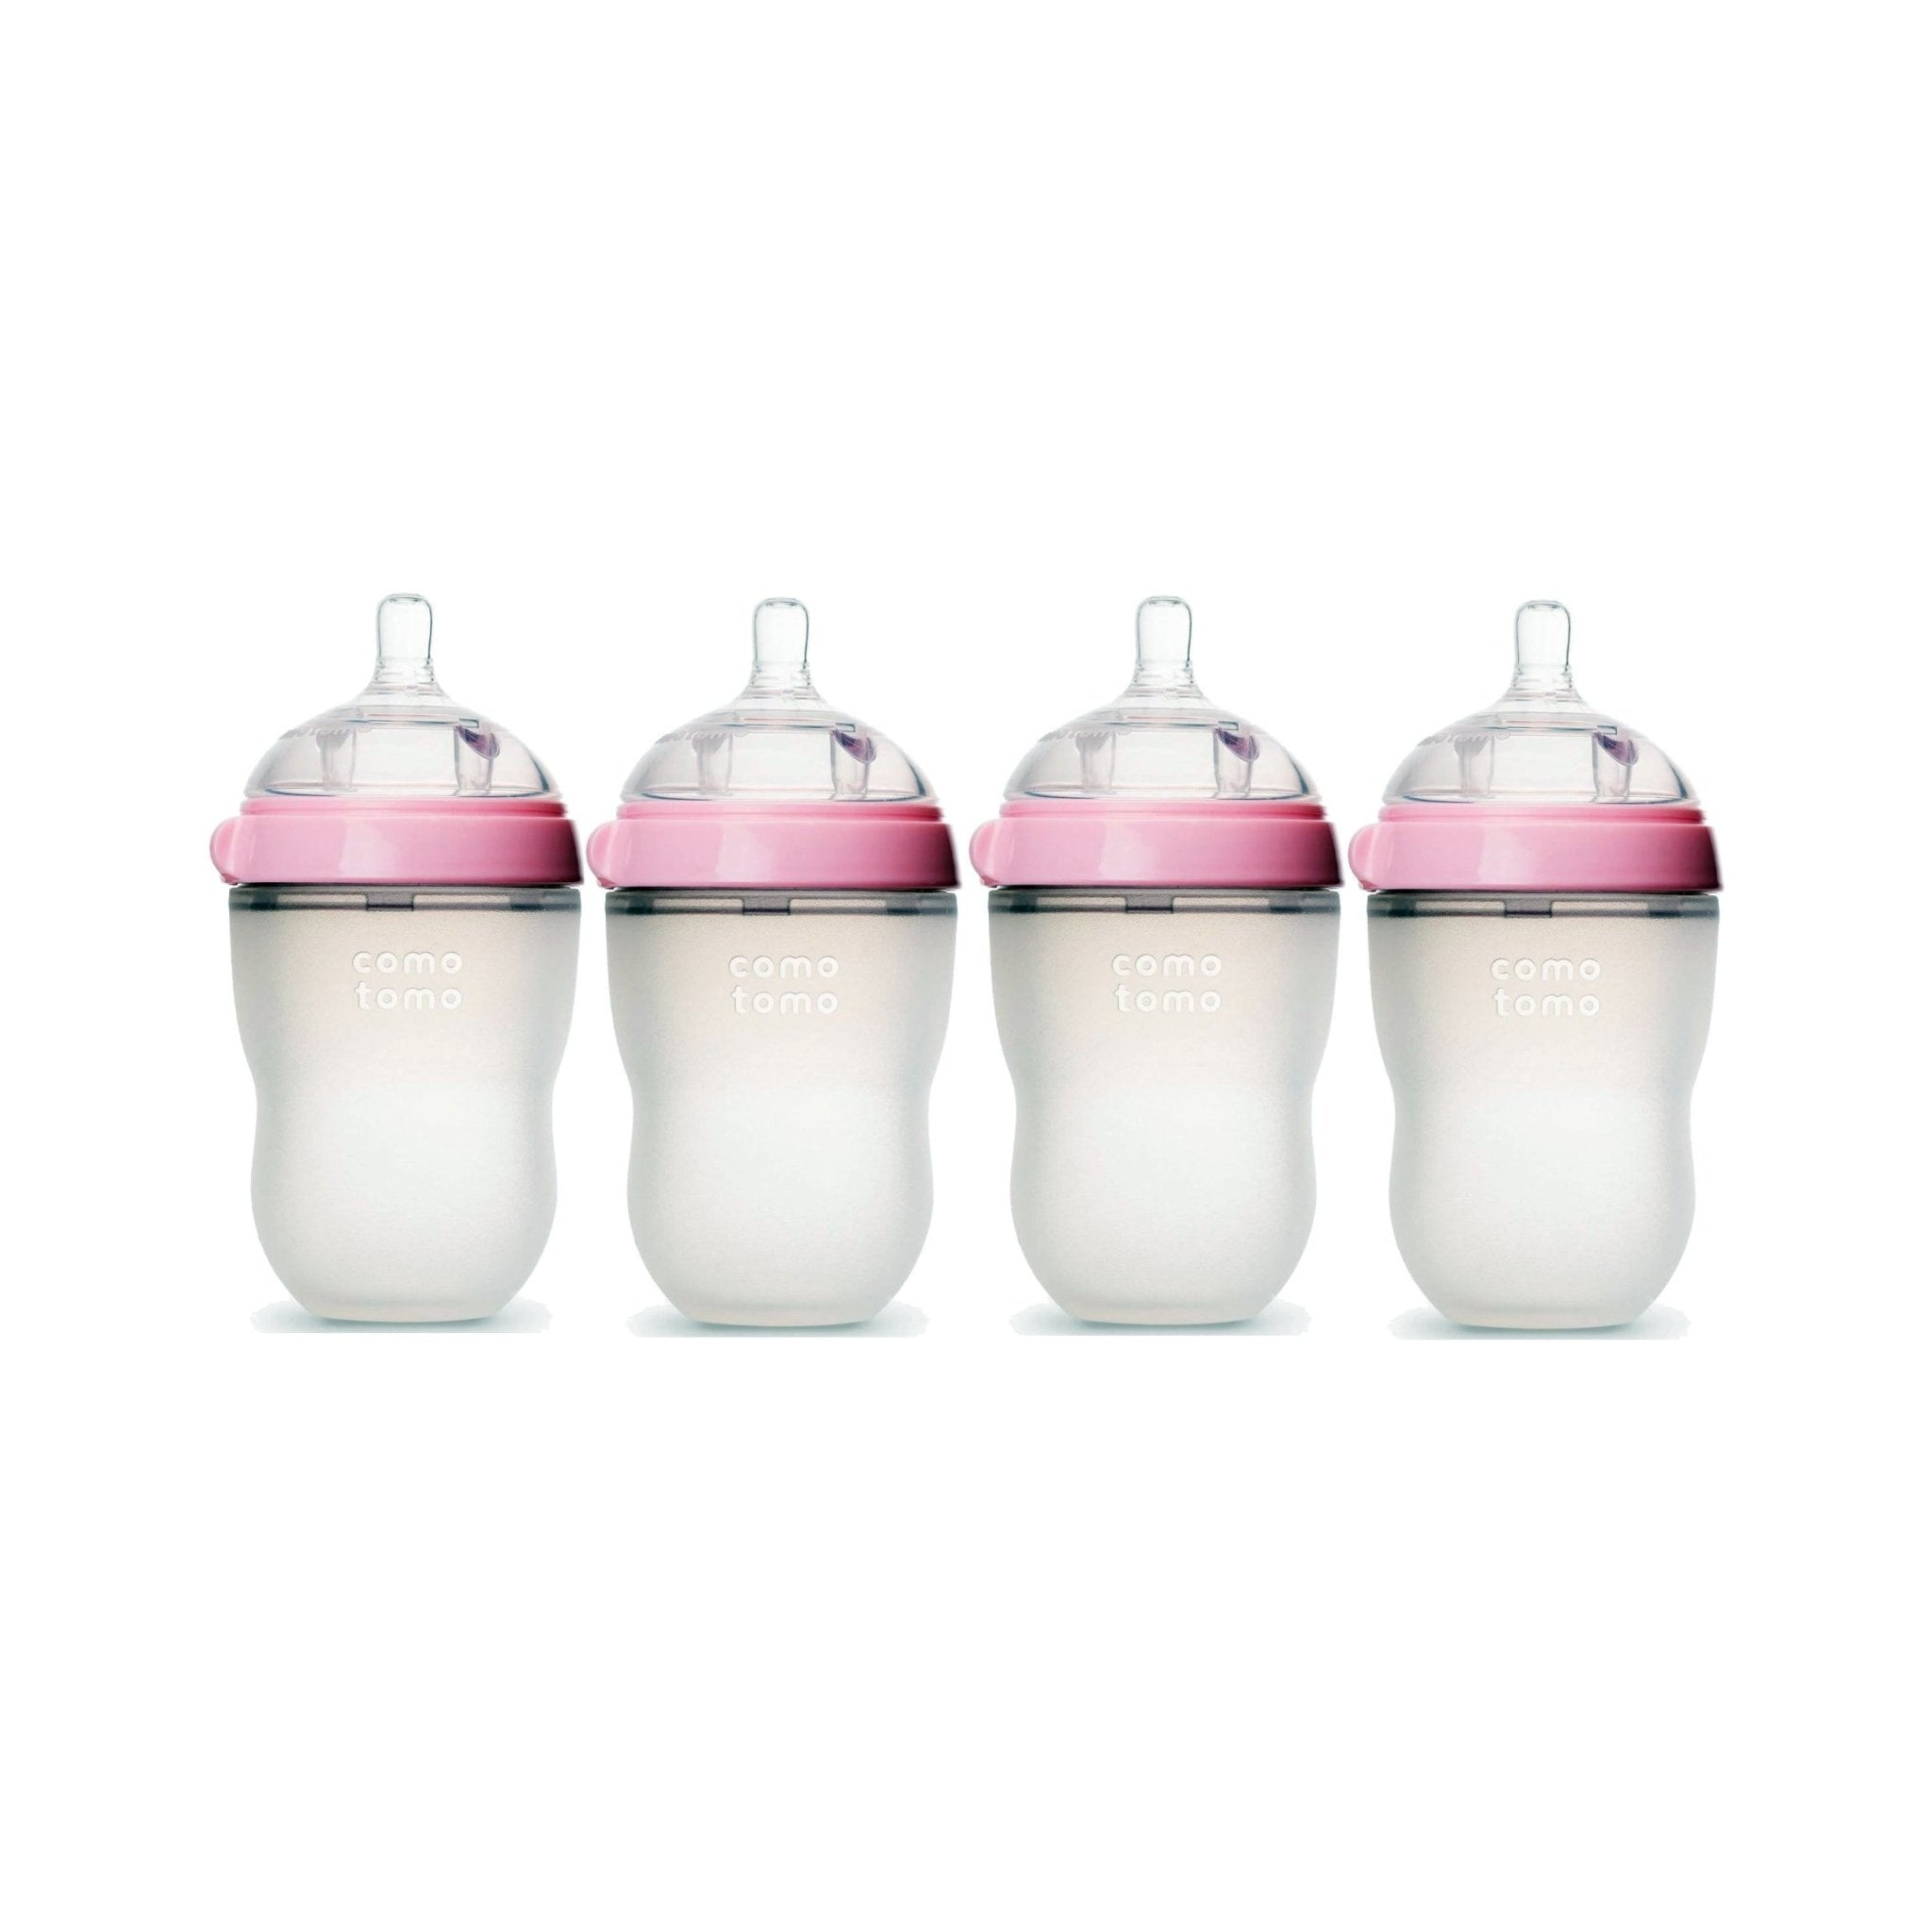 Comotomo Baby Bottle 8 Ounce/250 ml Kit, Pink, Pack of 4 - ANB Baby -$20 - $50